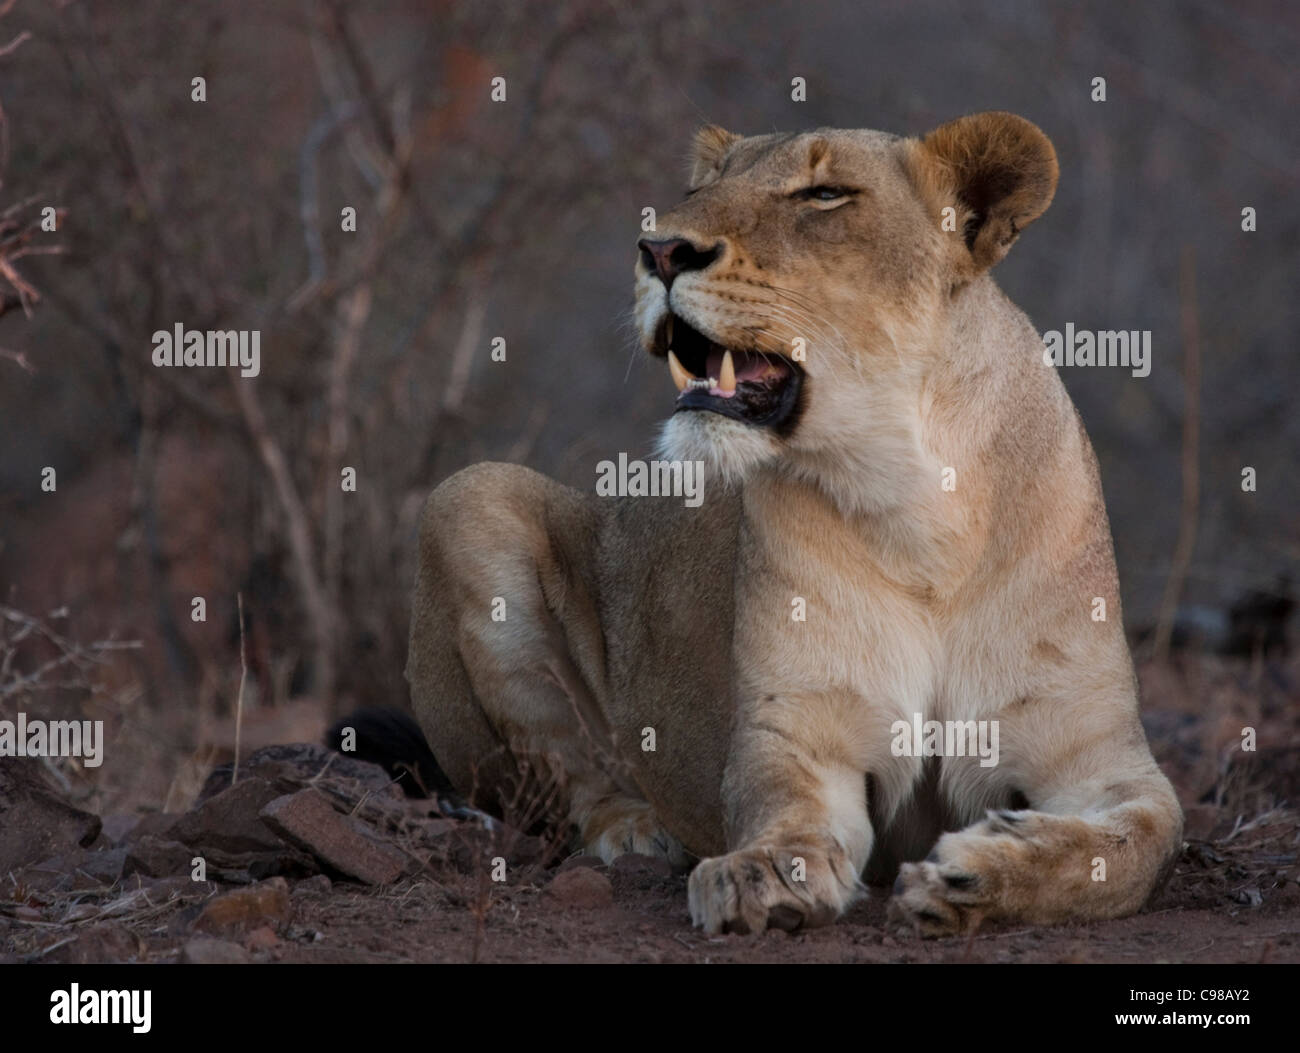 Lioness resting Stock Photo